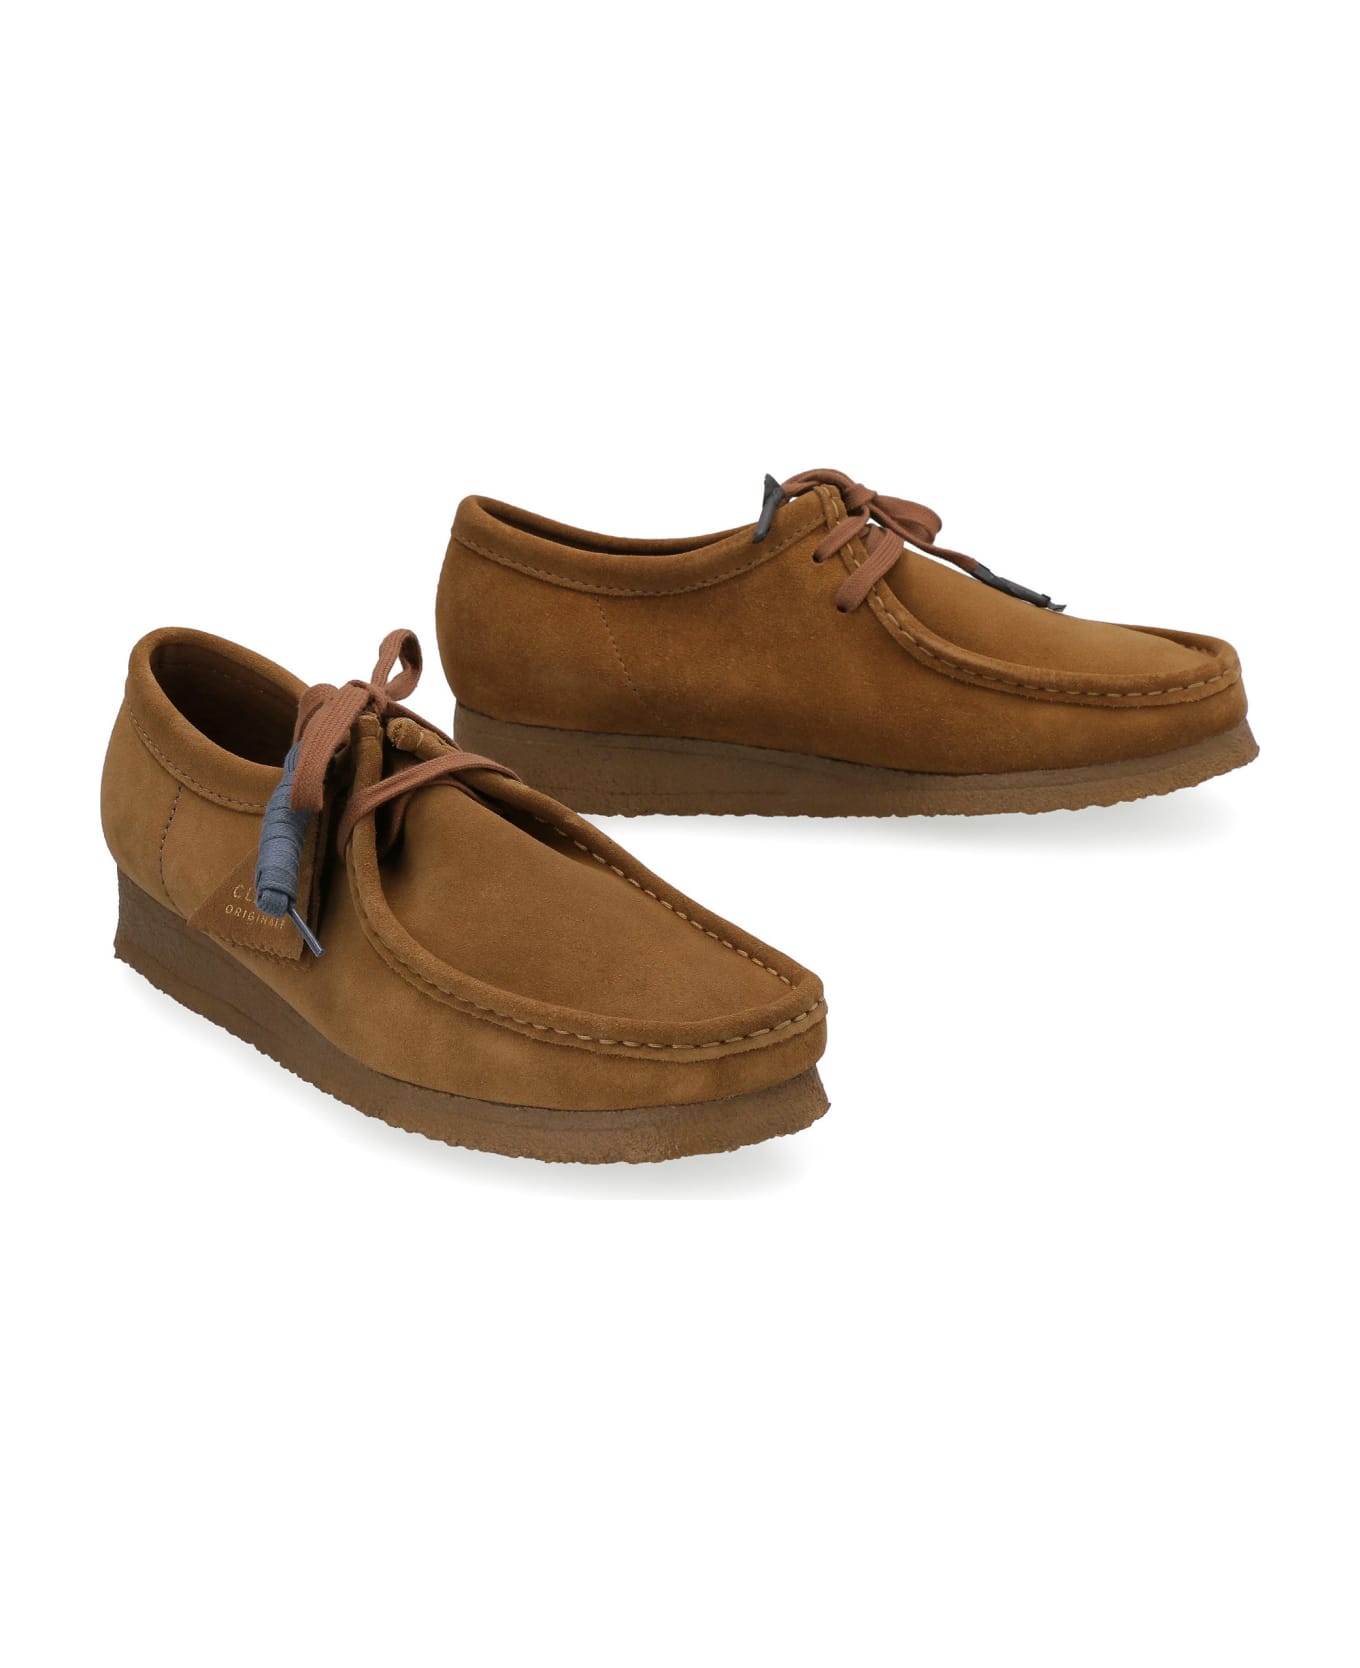 Clarks Wallabee Suede Lace-up Shoes - Saddle Brown ローファー＆デッキシューズ